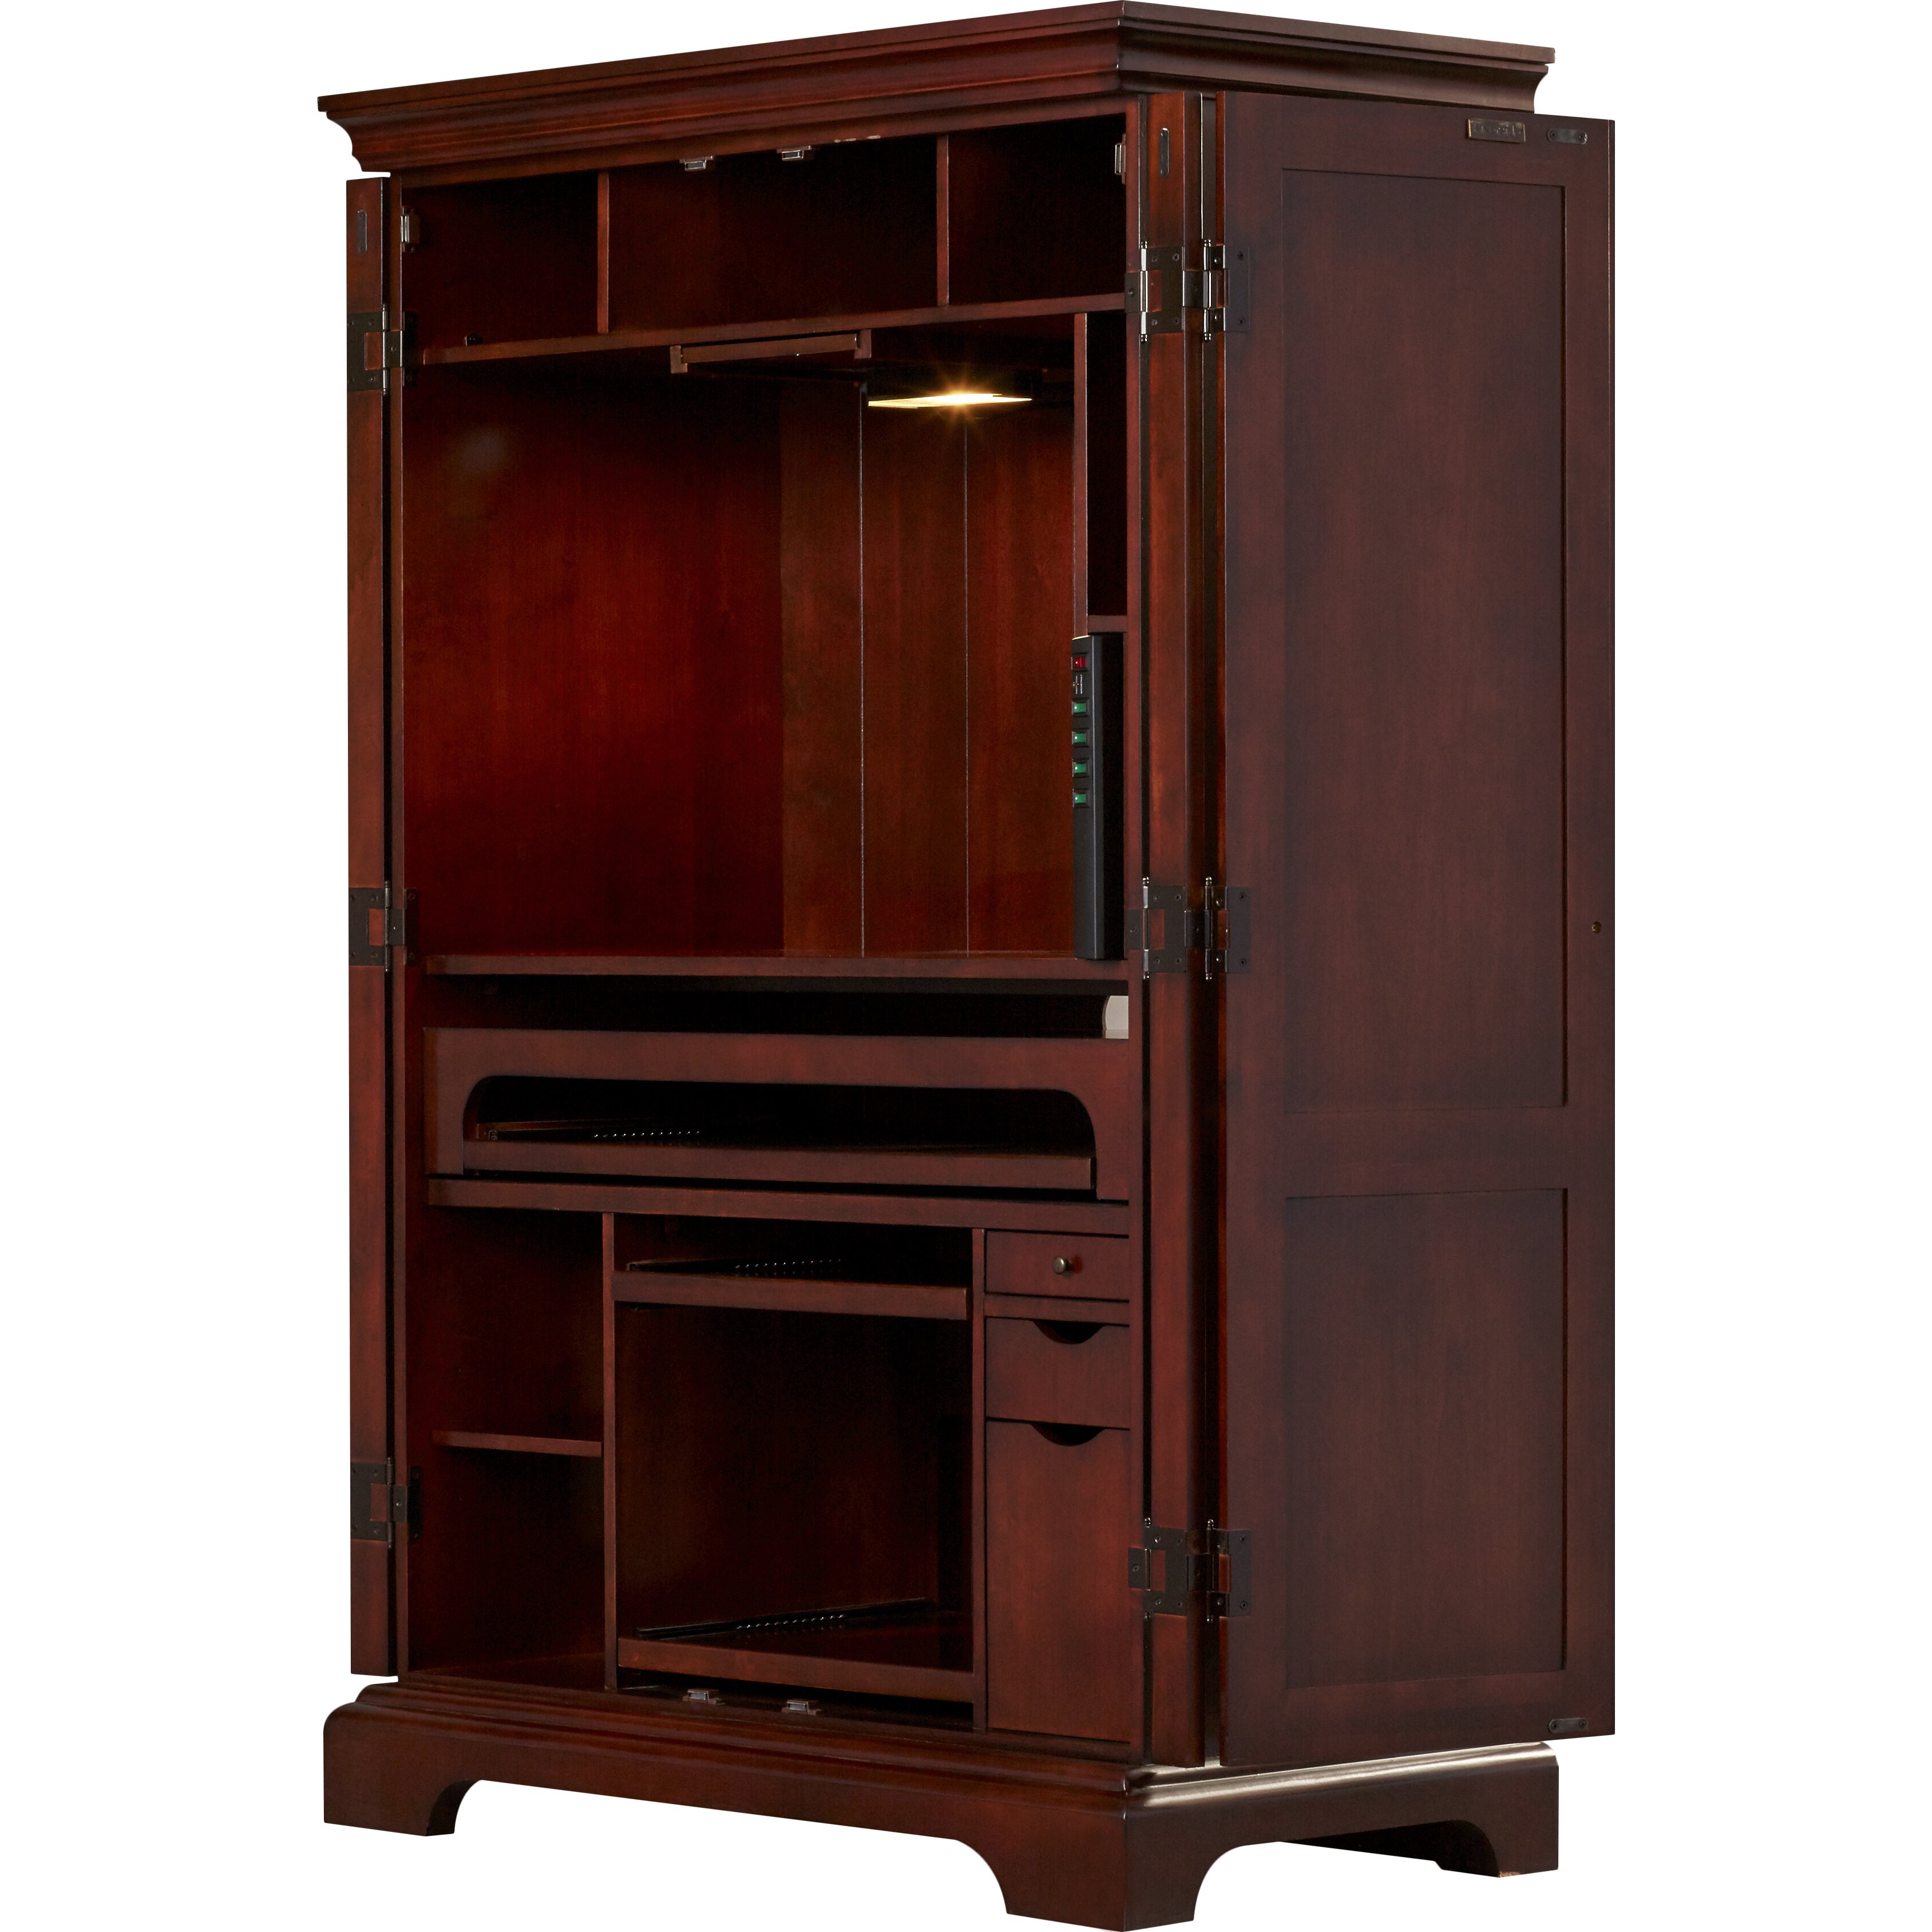 Darby Home Co Sidell Armoire Desk & Reviews  Wayfair